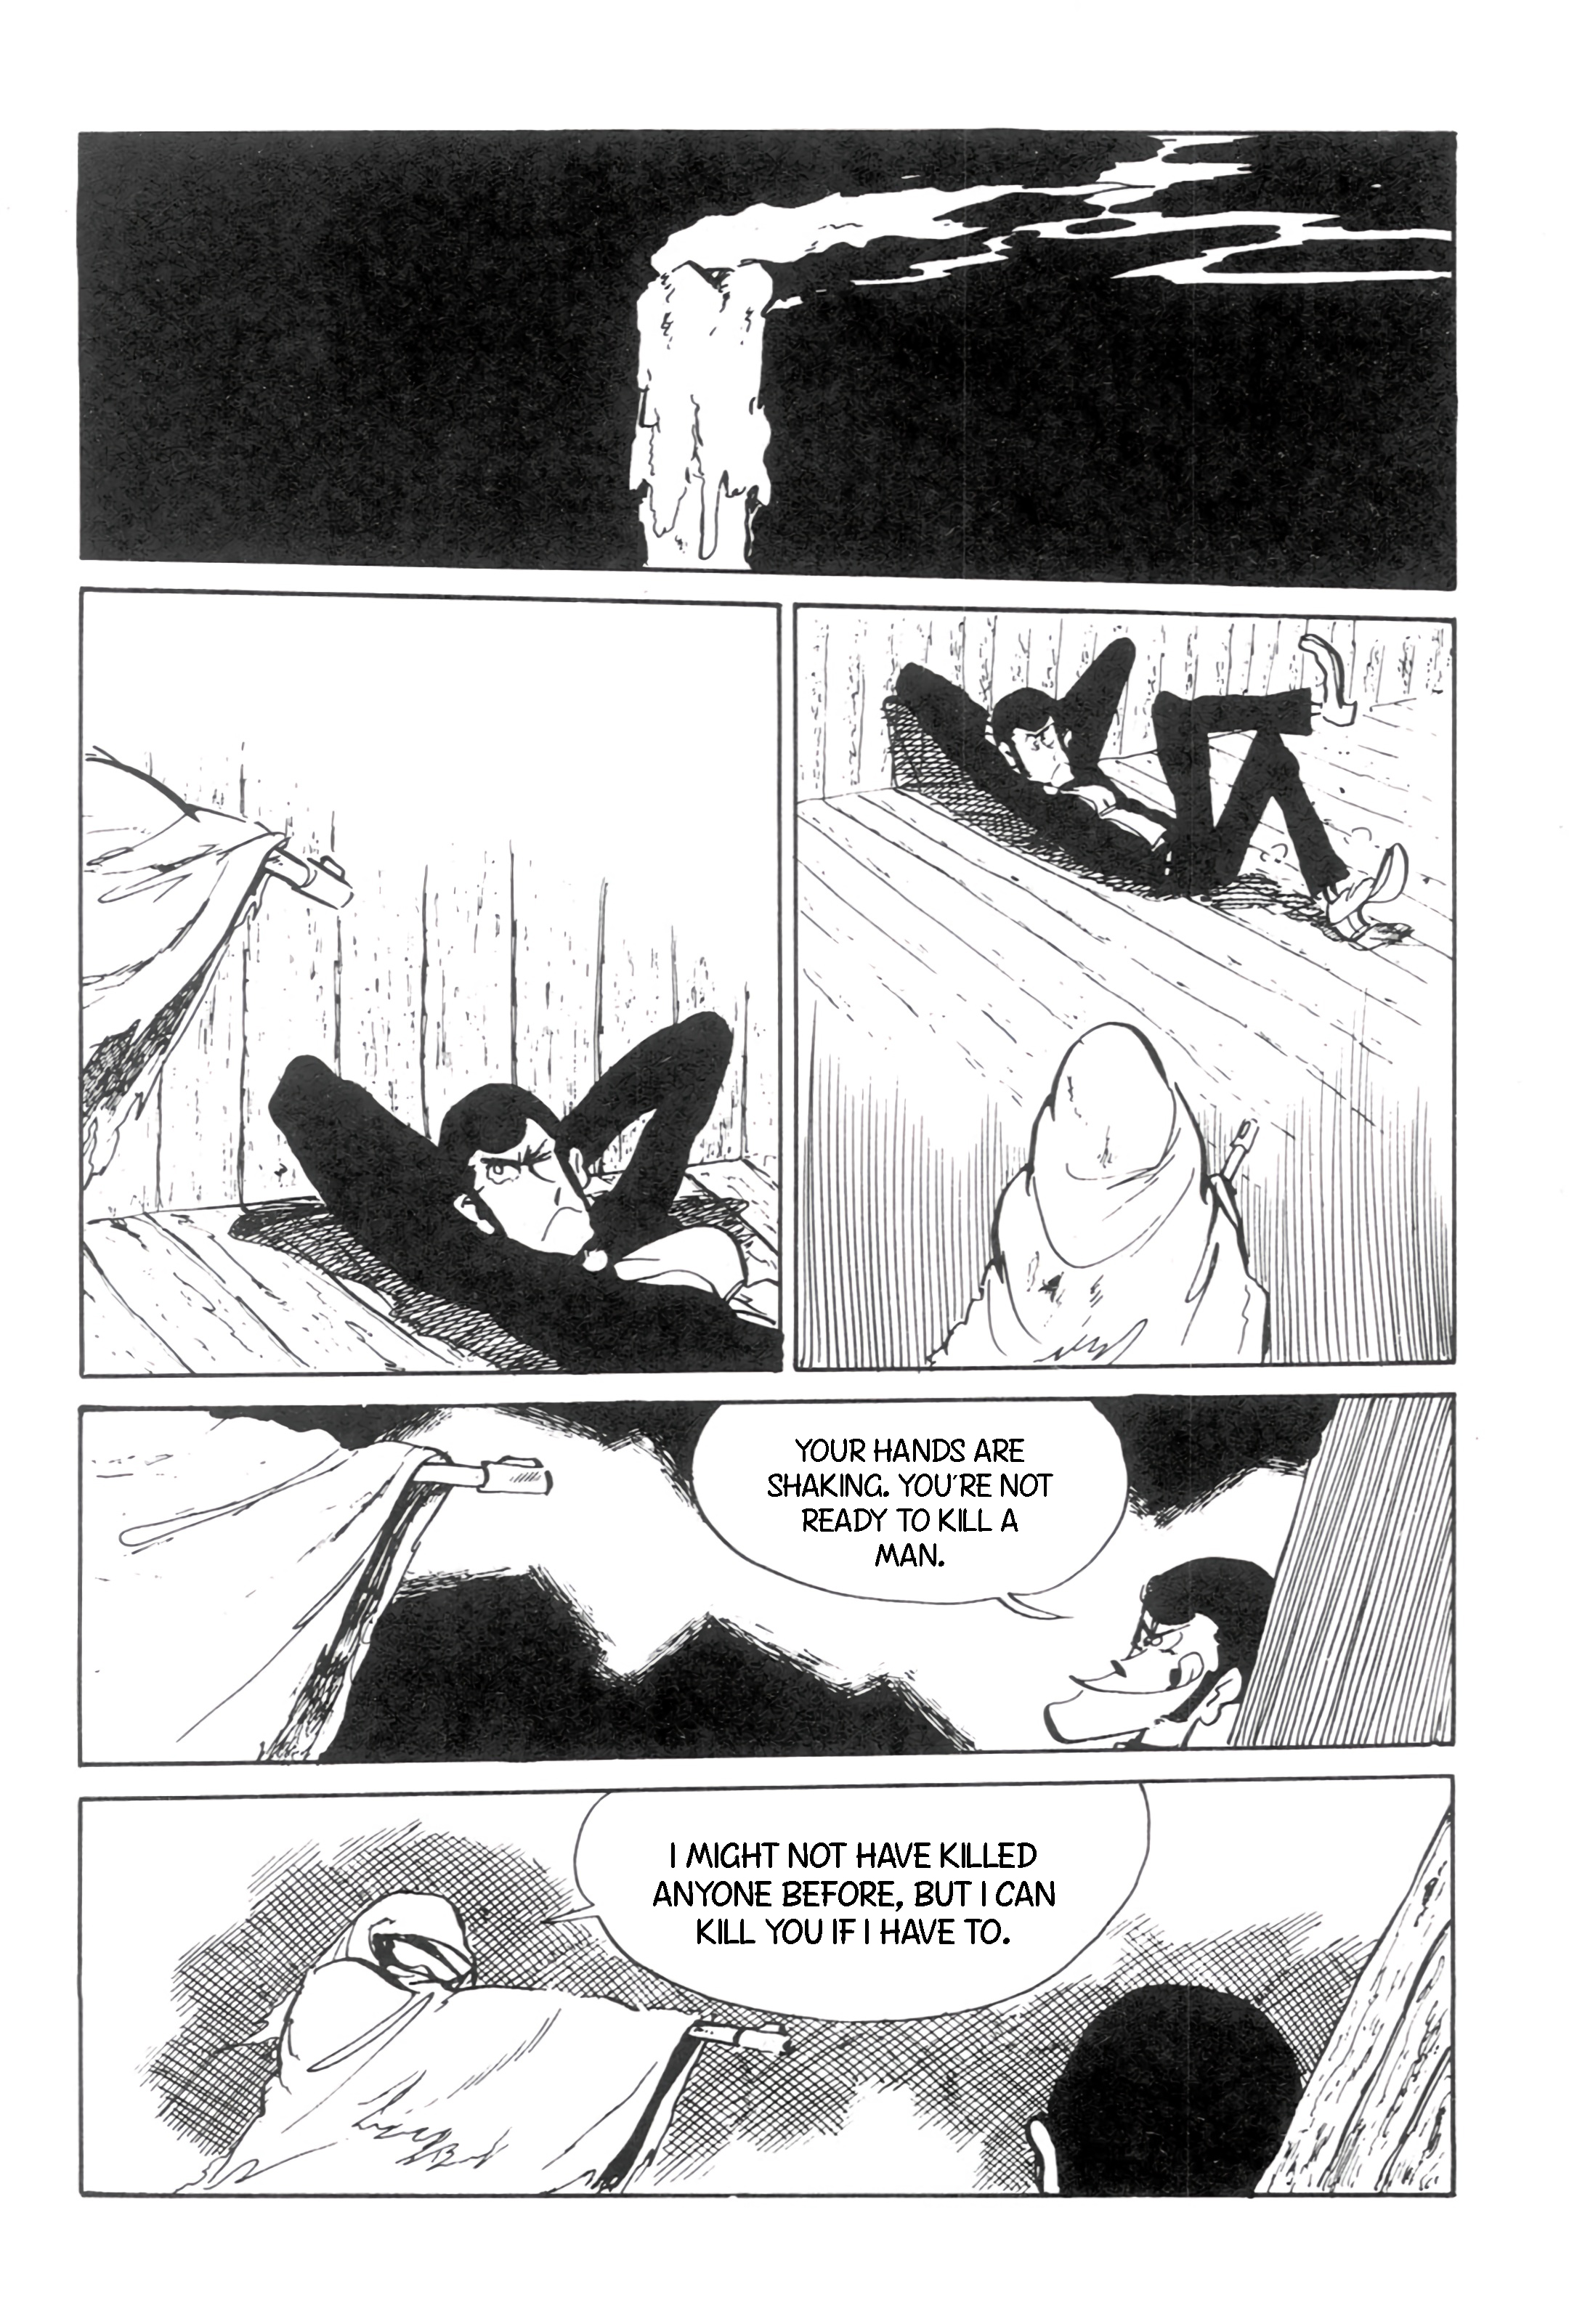 Lupin Iii: World’S Most Wanted - 135 page 14-1ed9e96d